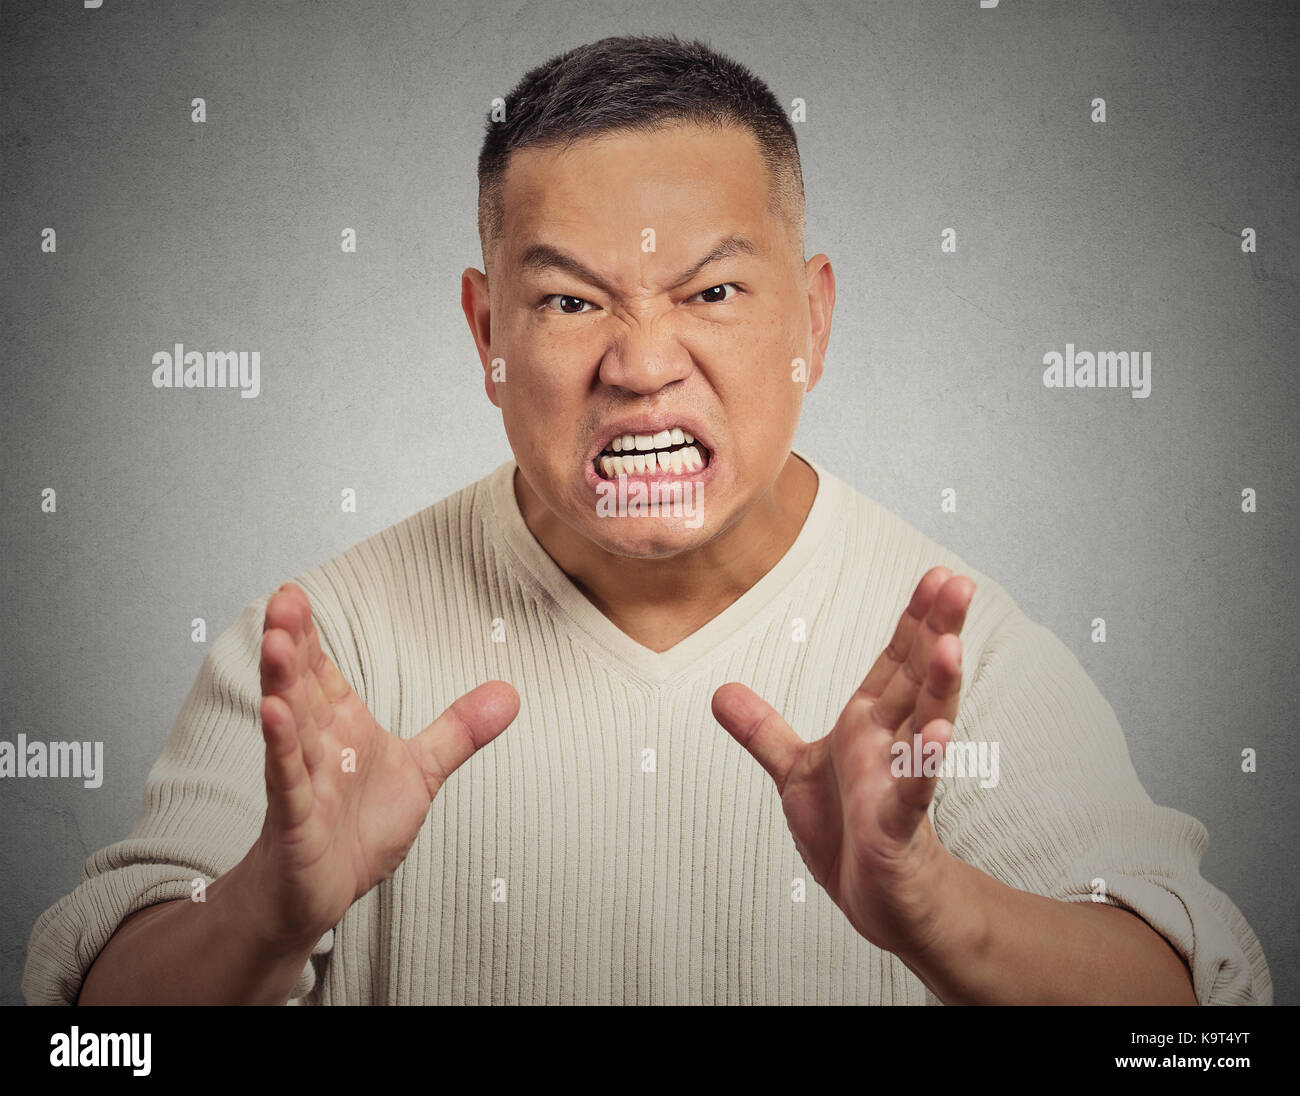 Portrait, bitter, displeased angry, grumpy man yelling screaming isolated grey wall background. Negative human emotion facial expression Stock Photo